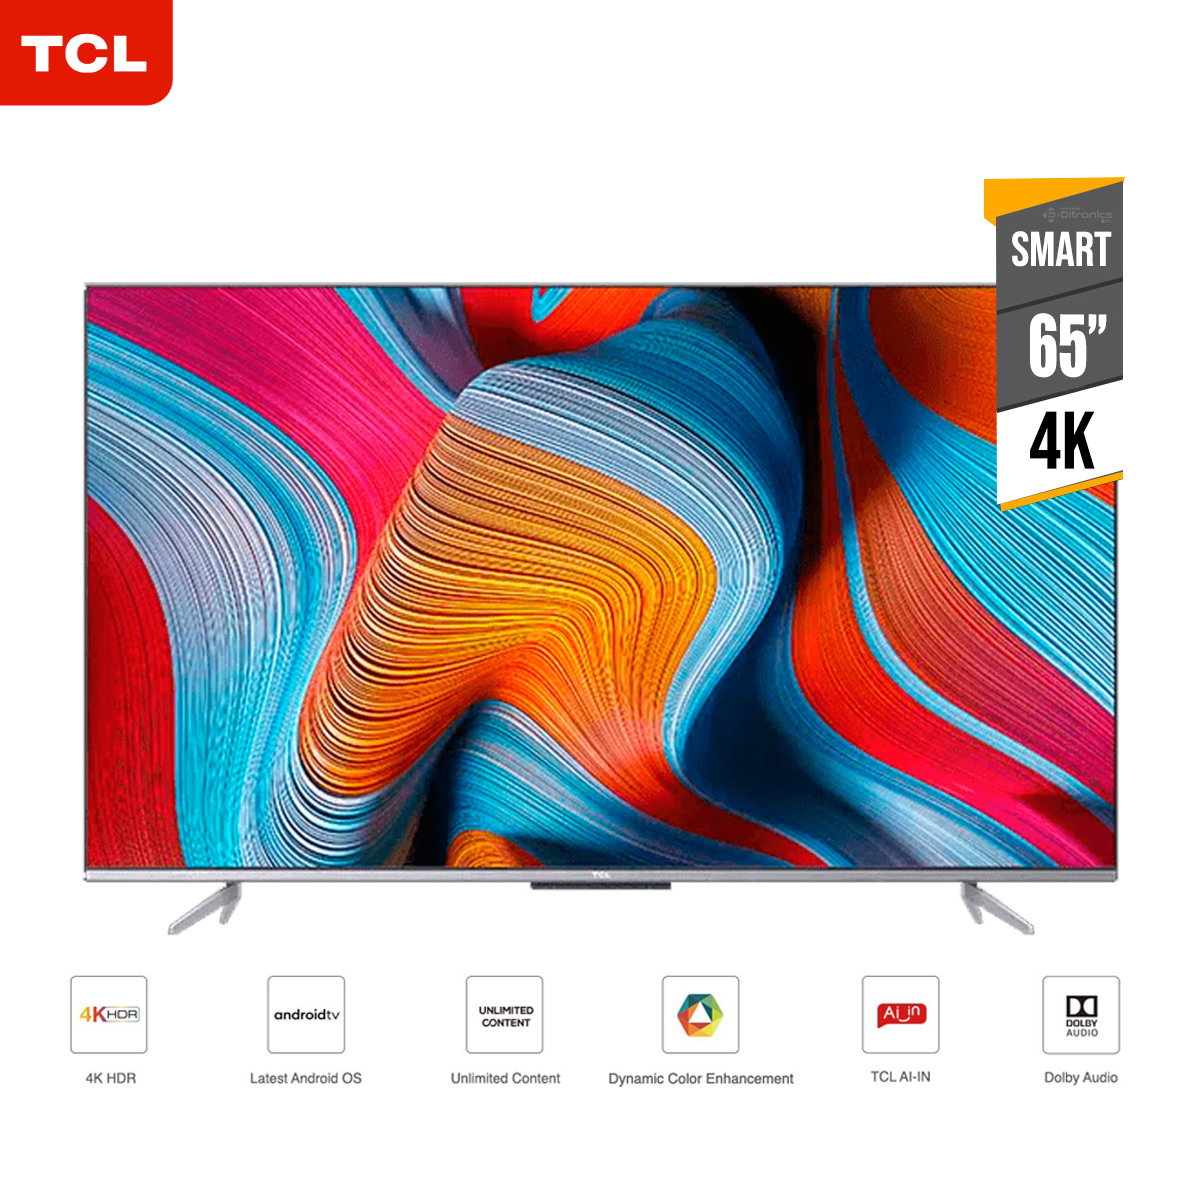 Smart Tv Tcl 32 32s7000 Android Dolby Audio Bluetooth - TCL